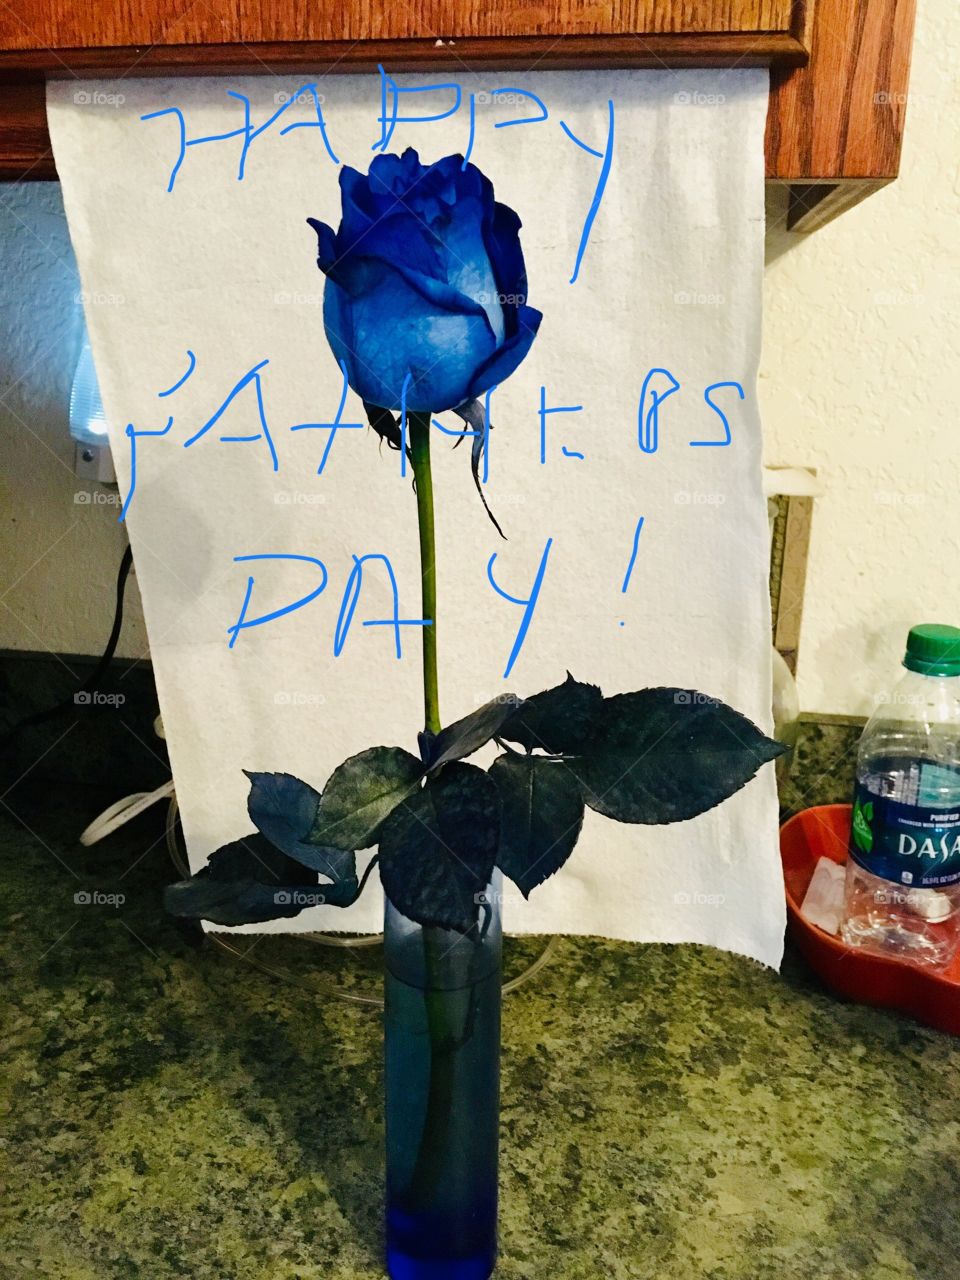 Passing this blue rose on to all the fathers out there. Happy Father’s Day to all!!